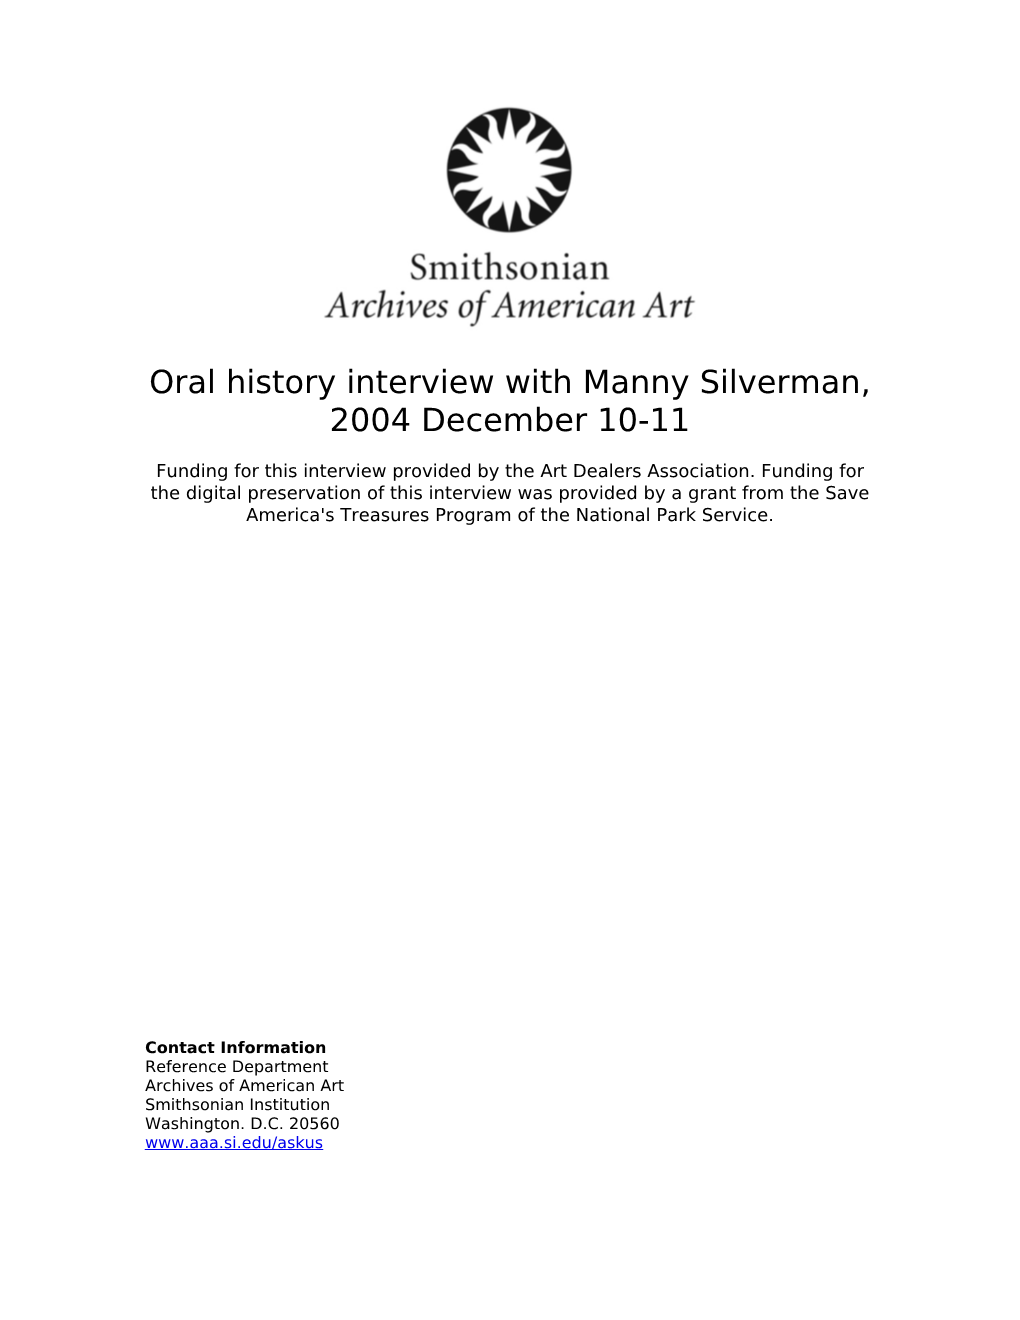 Oral History Interview with Manny Silverman, 2004 December 10-11